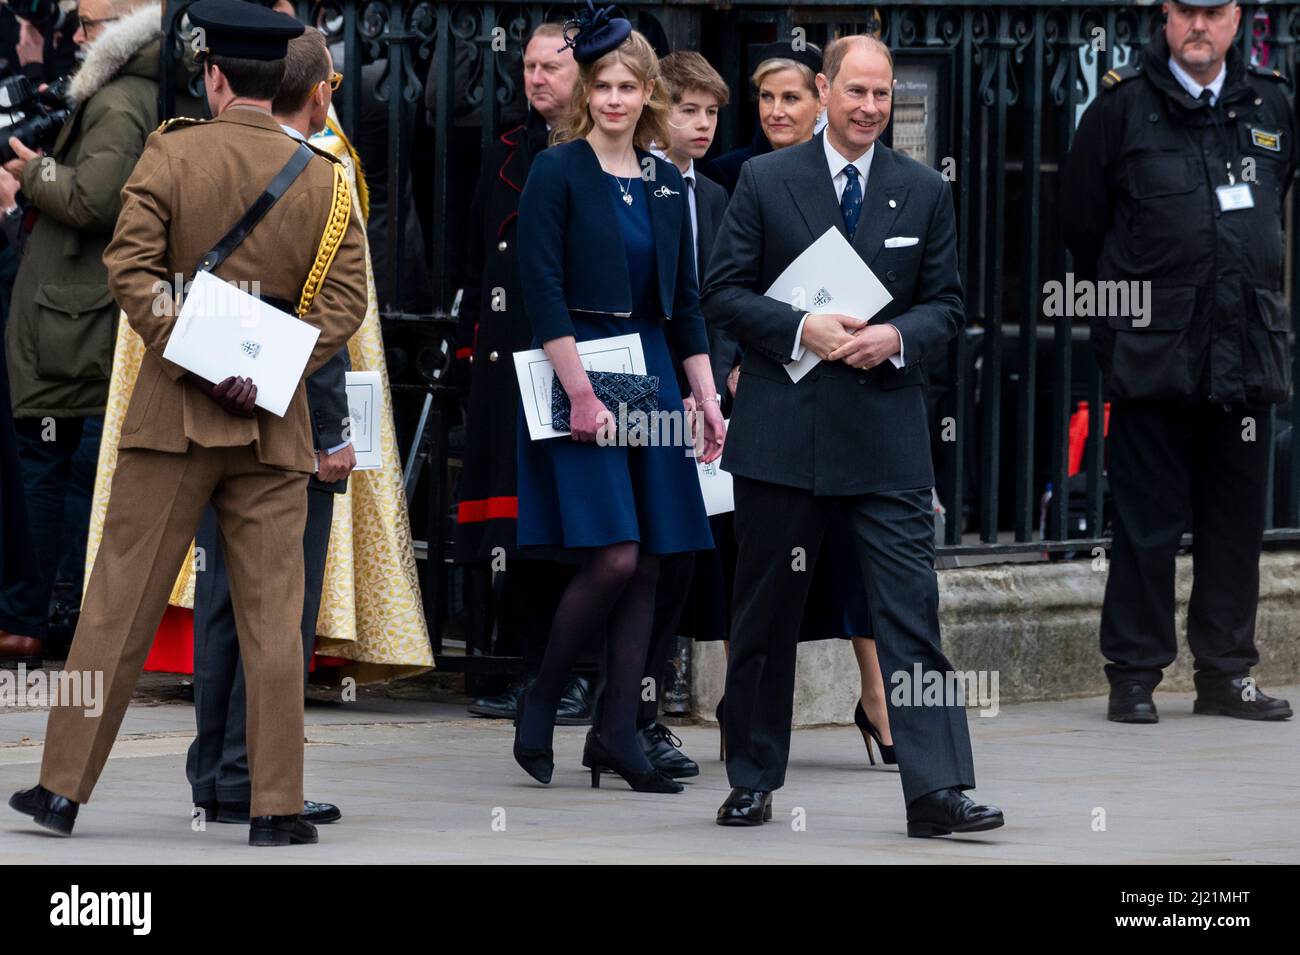 London, UK.  29 March 2022. Prince Edward, Sophie, Countess of Wessex, Lady Louise Windsor and James, Viscount Severn, leave Westminster Abbey after the Service of Thanksgiving for the life of HRH The Prince Philip, Duke of Edinburgh.  Credit: Stephen Chung / Alamy Live News Stock Photo